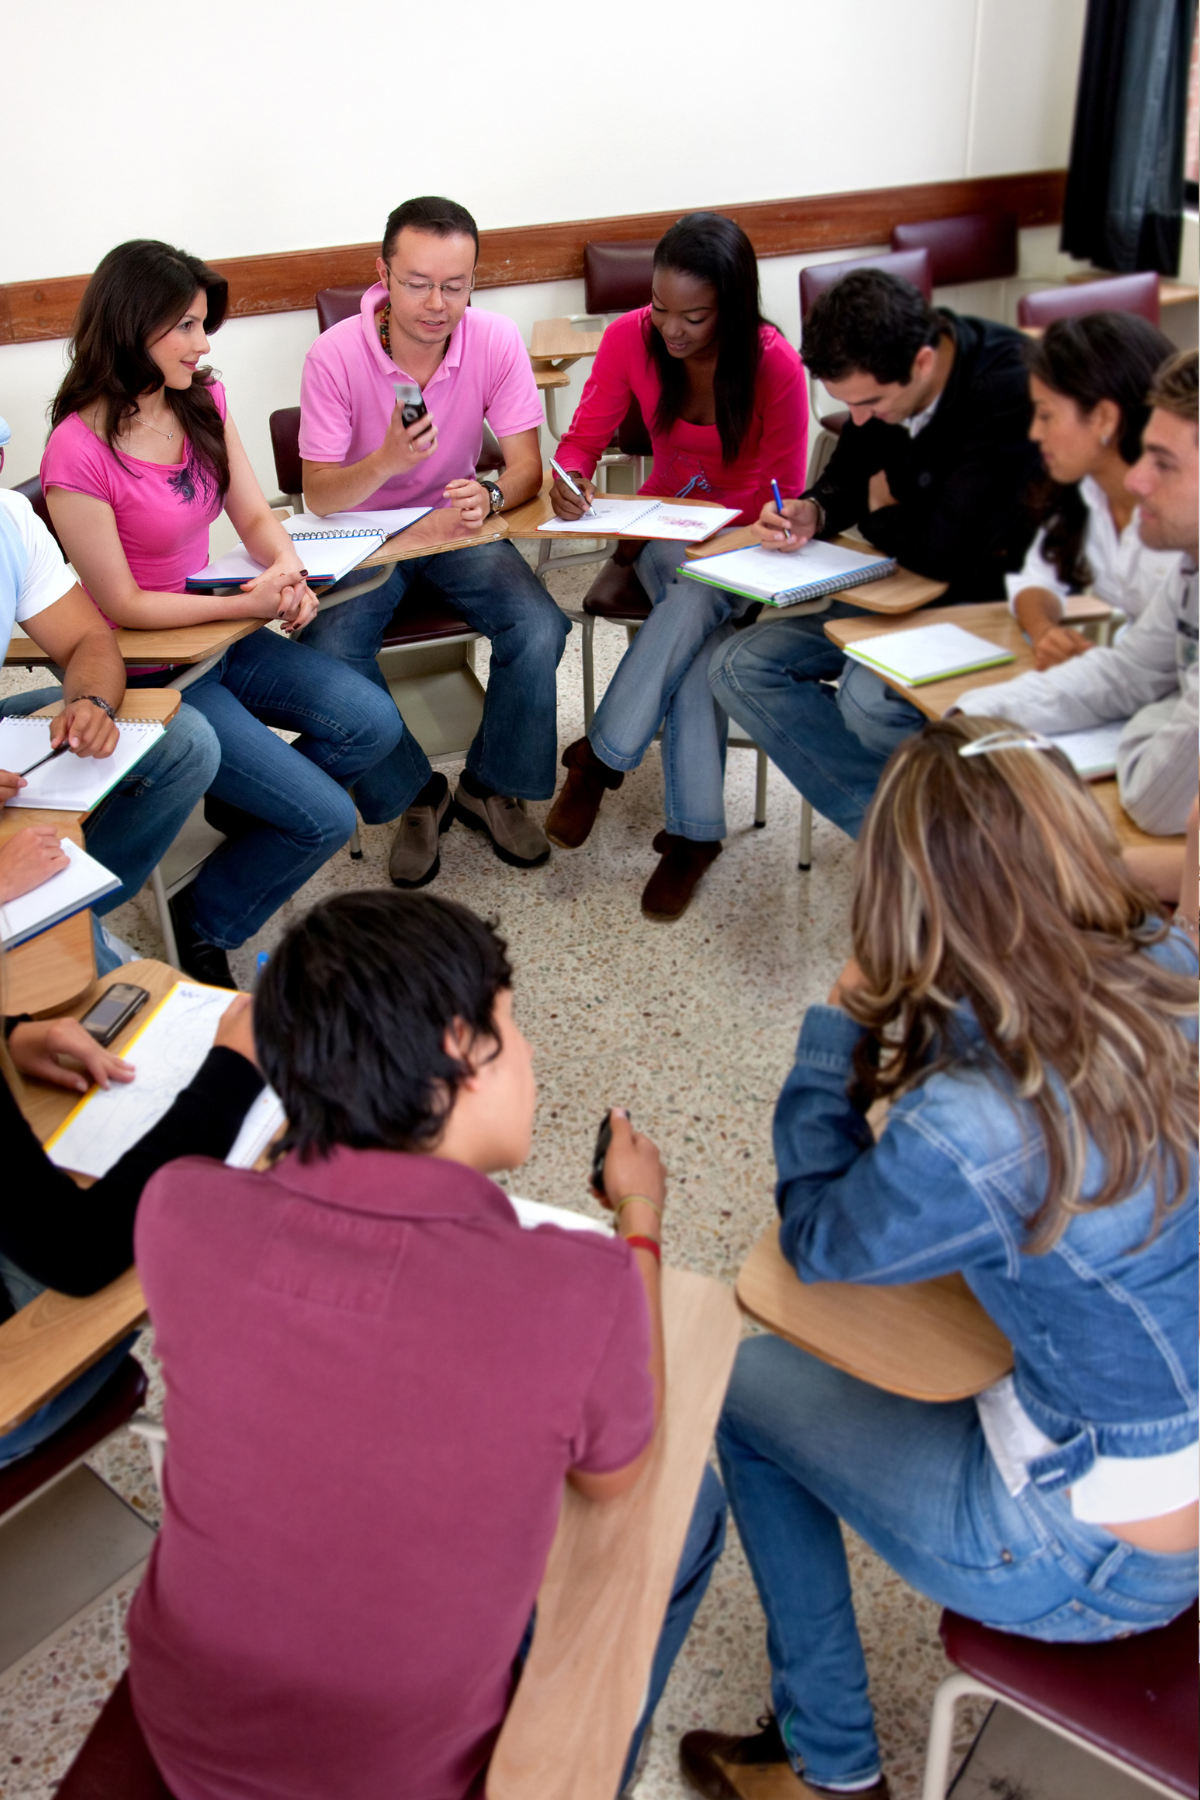 A group of high school or college age students sit at desks arranged in a circle with writing implements and papers on them.